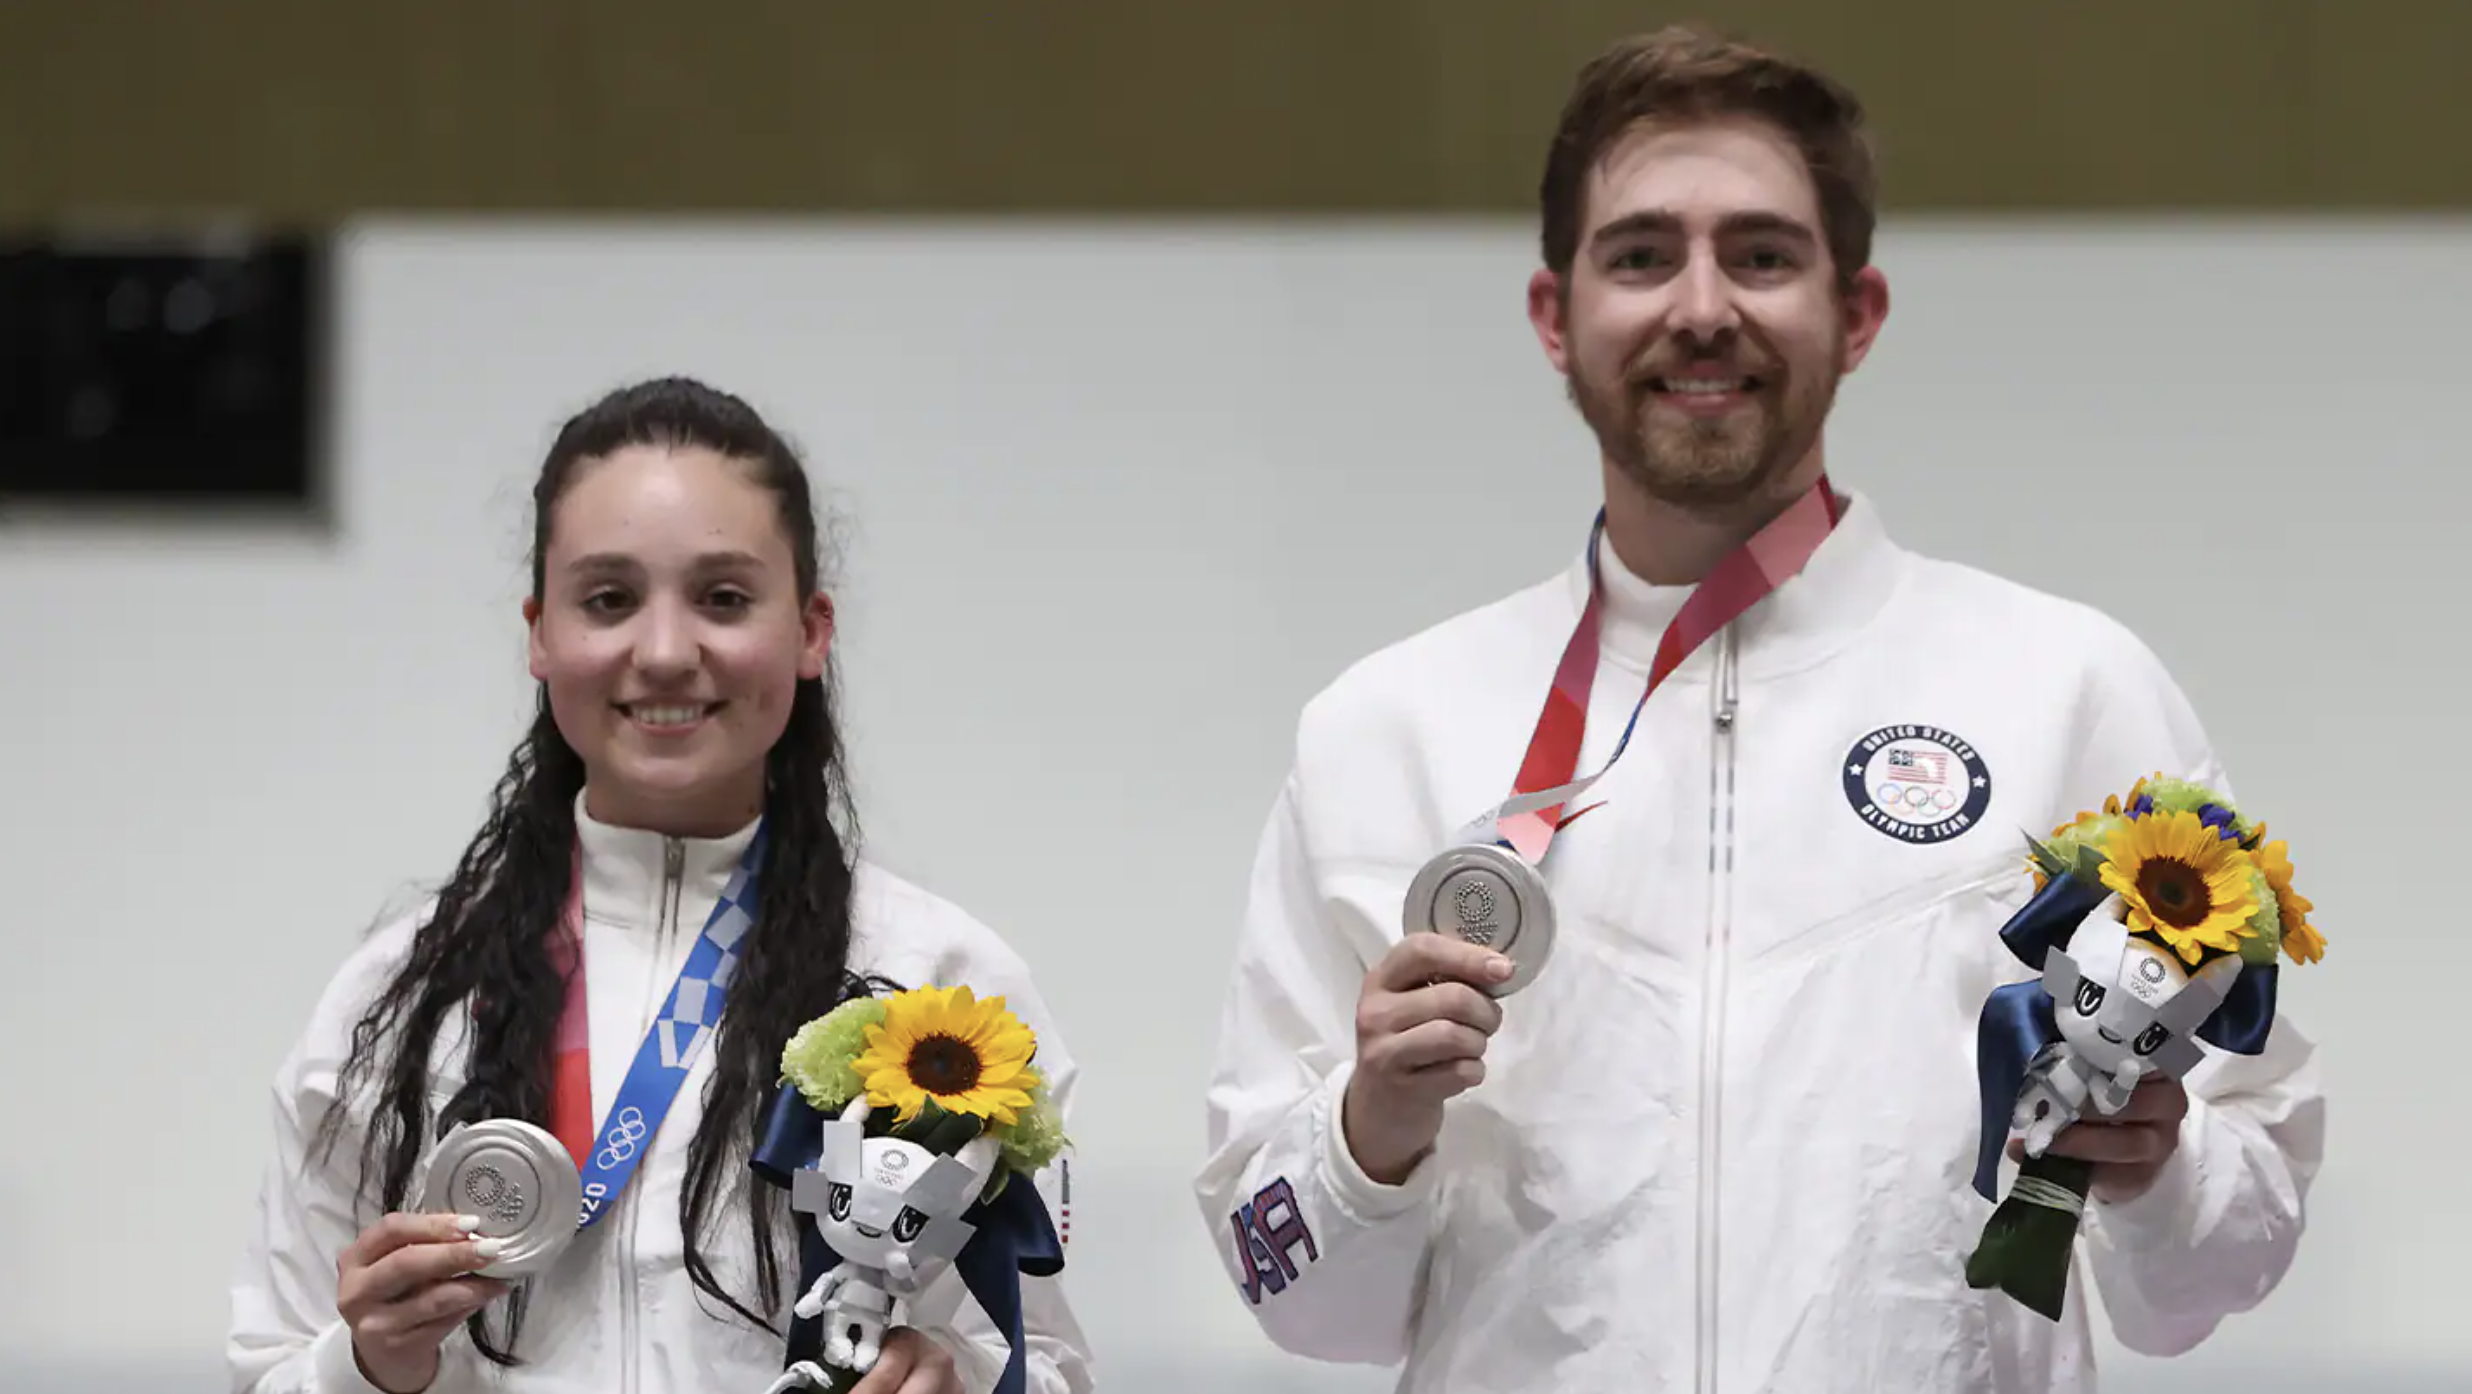 Team USA shooters take silver in 10-meter air rifle competition.